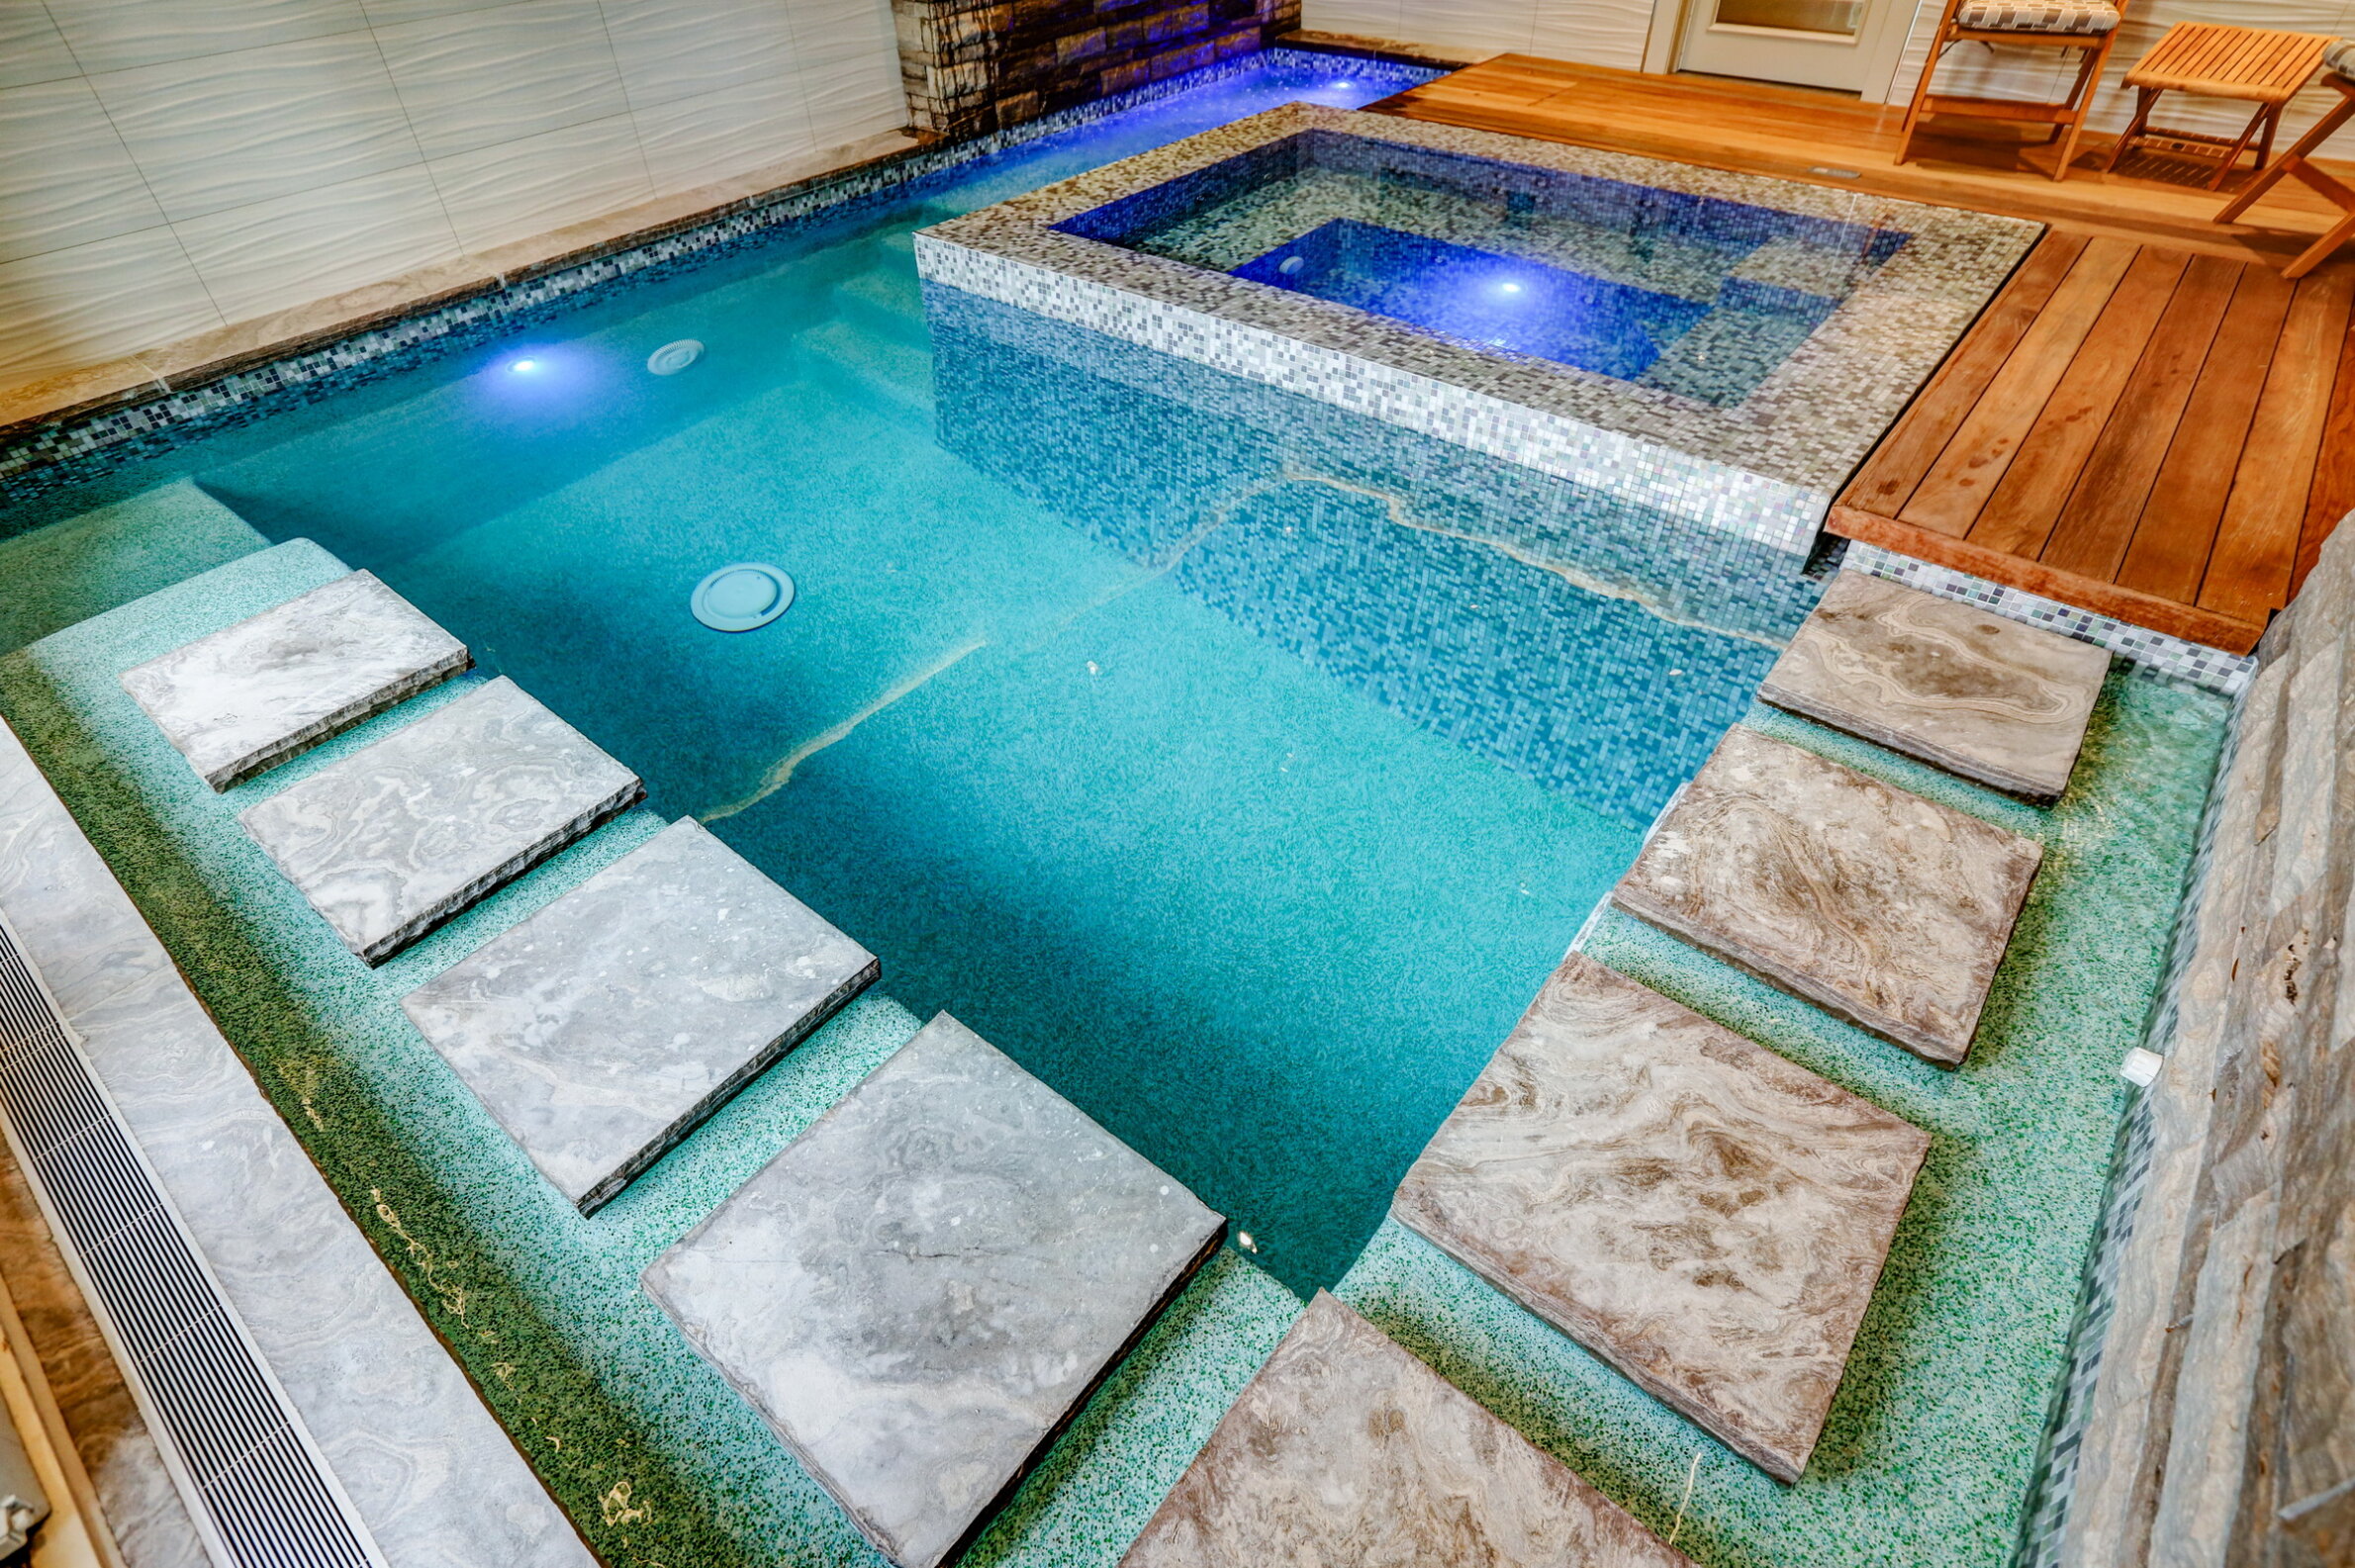 Indoor pool with a sleek design featuring stone steps, a blue mosaic tile spa section, ambient lighting, wooden deck, and a stone wall.